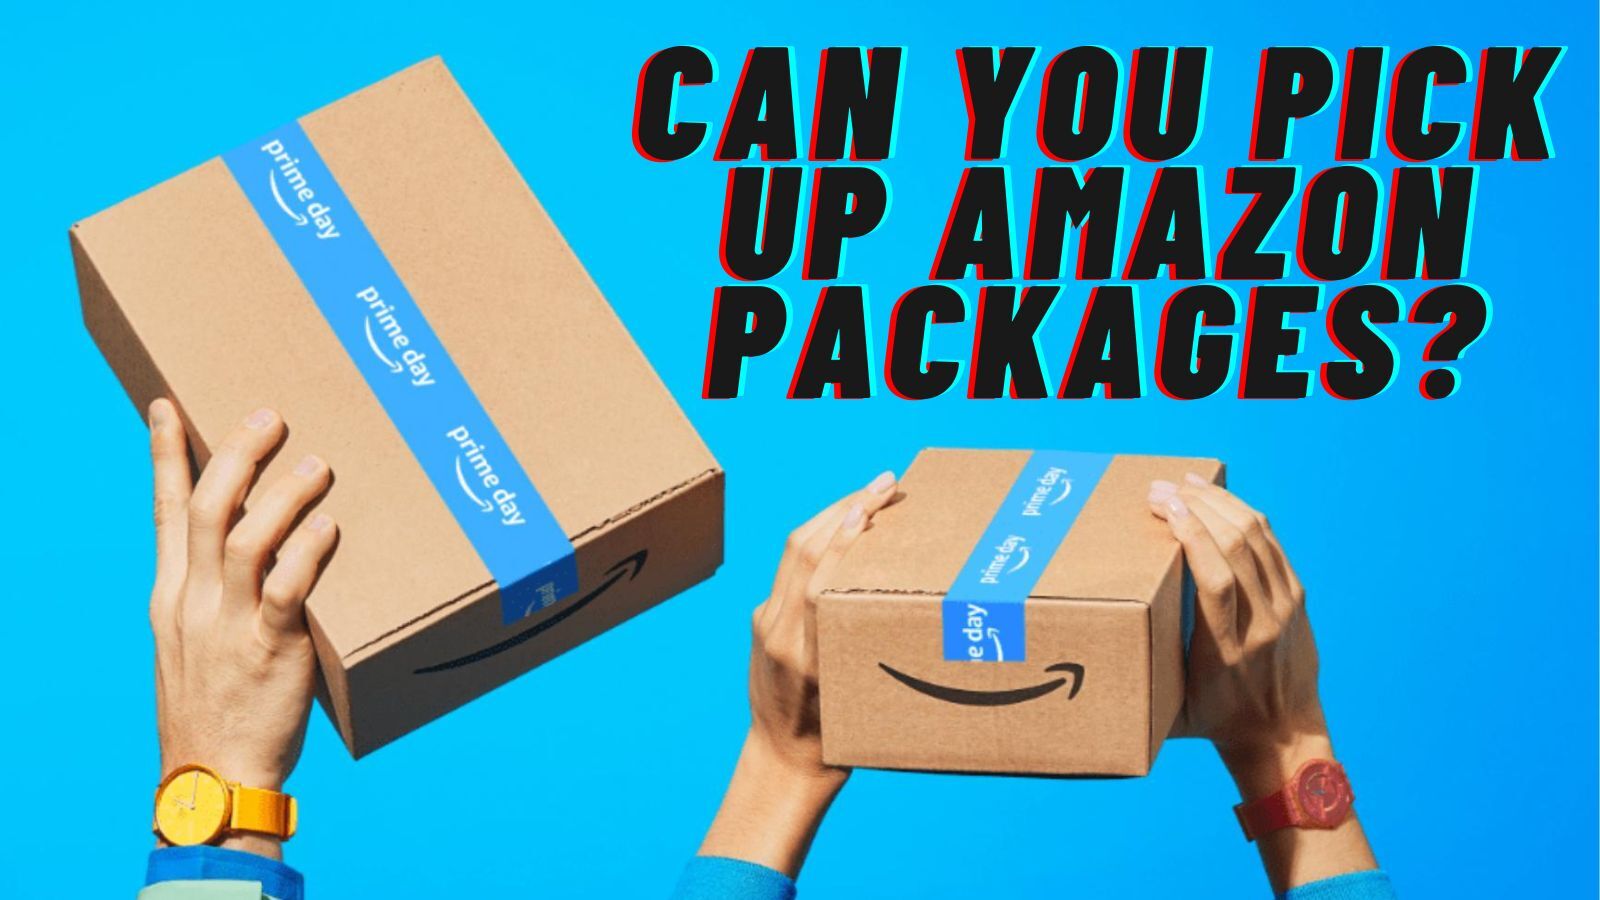 Can You Pick Up Amazon Packages? (Yes, Here Is How to Do That)